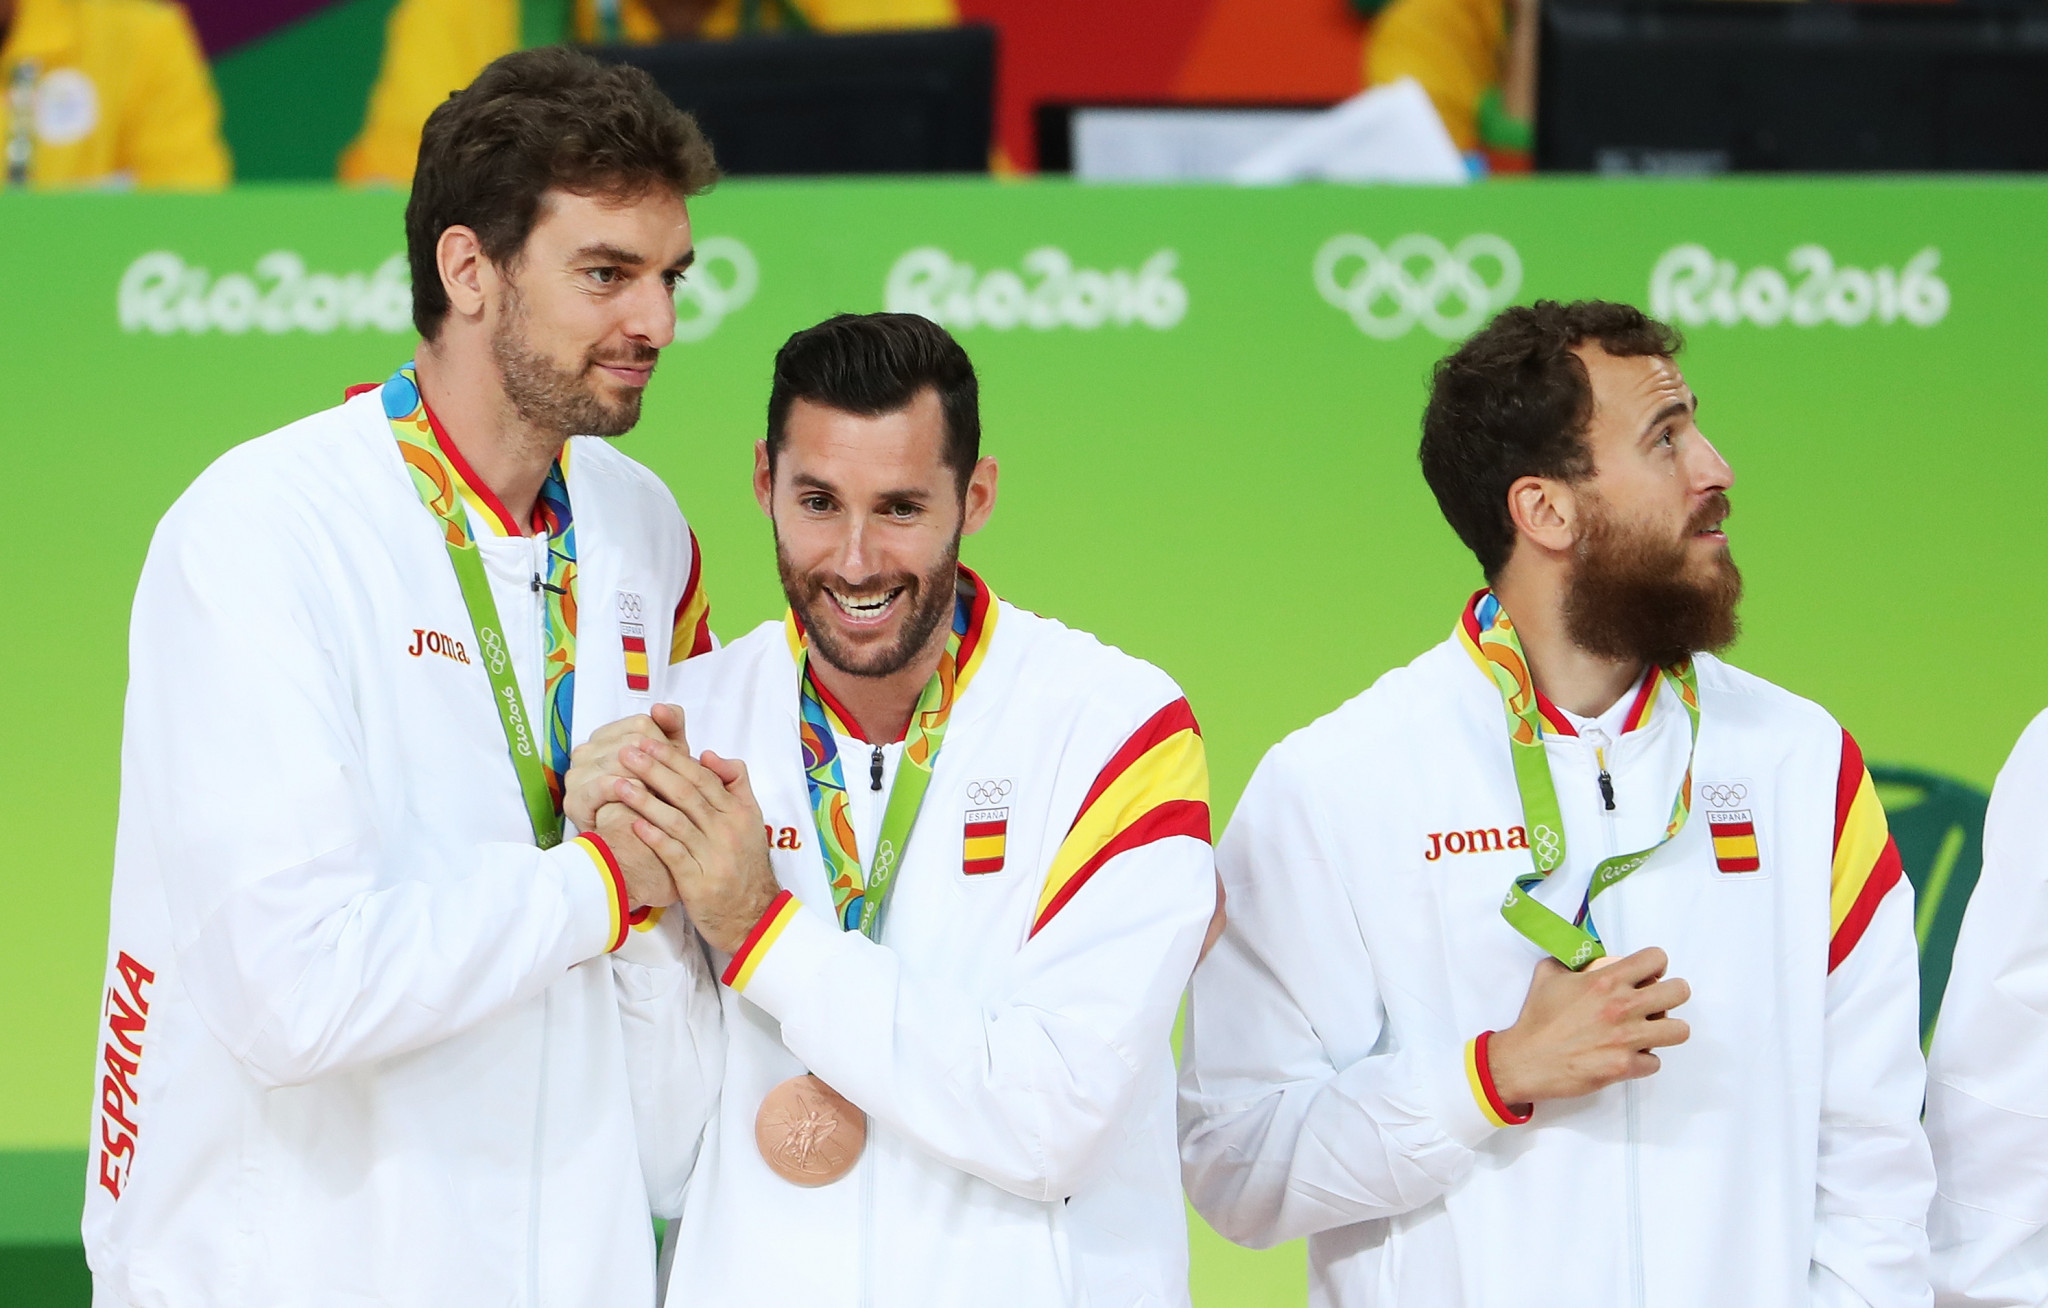 Pau Gasol Sáez, left, won three men's basketball medals for Spain at the Olympics ©Getty Images 